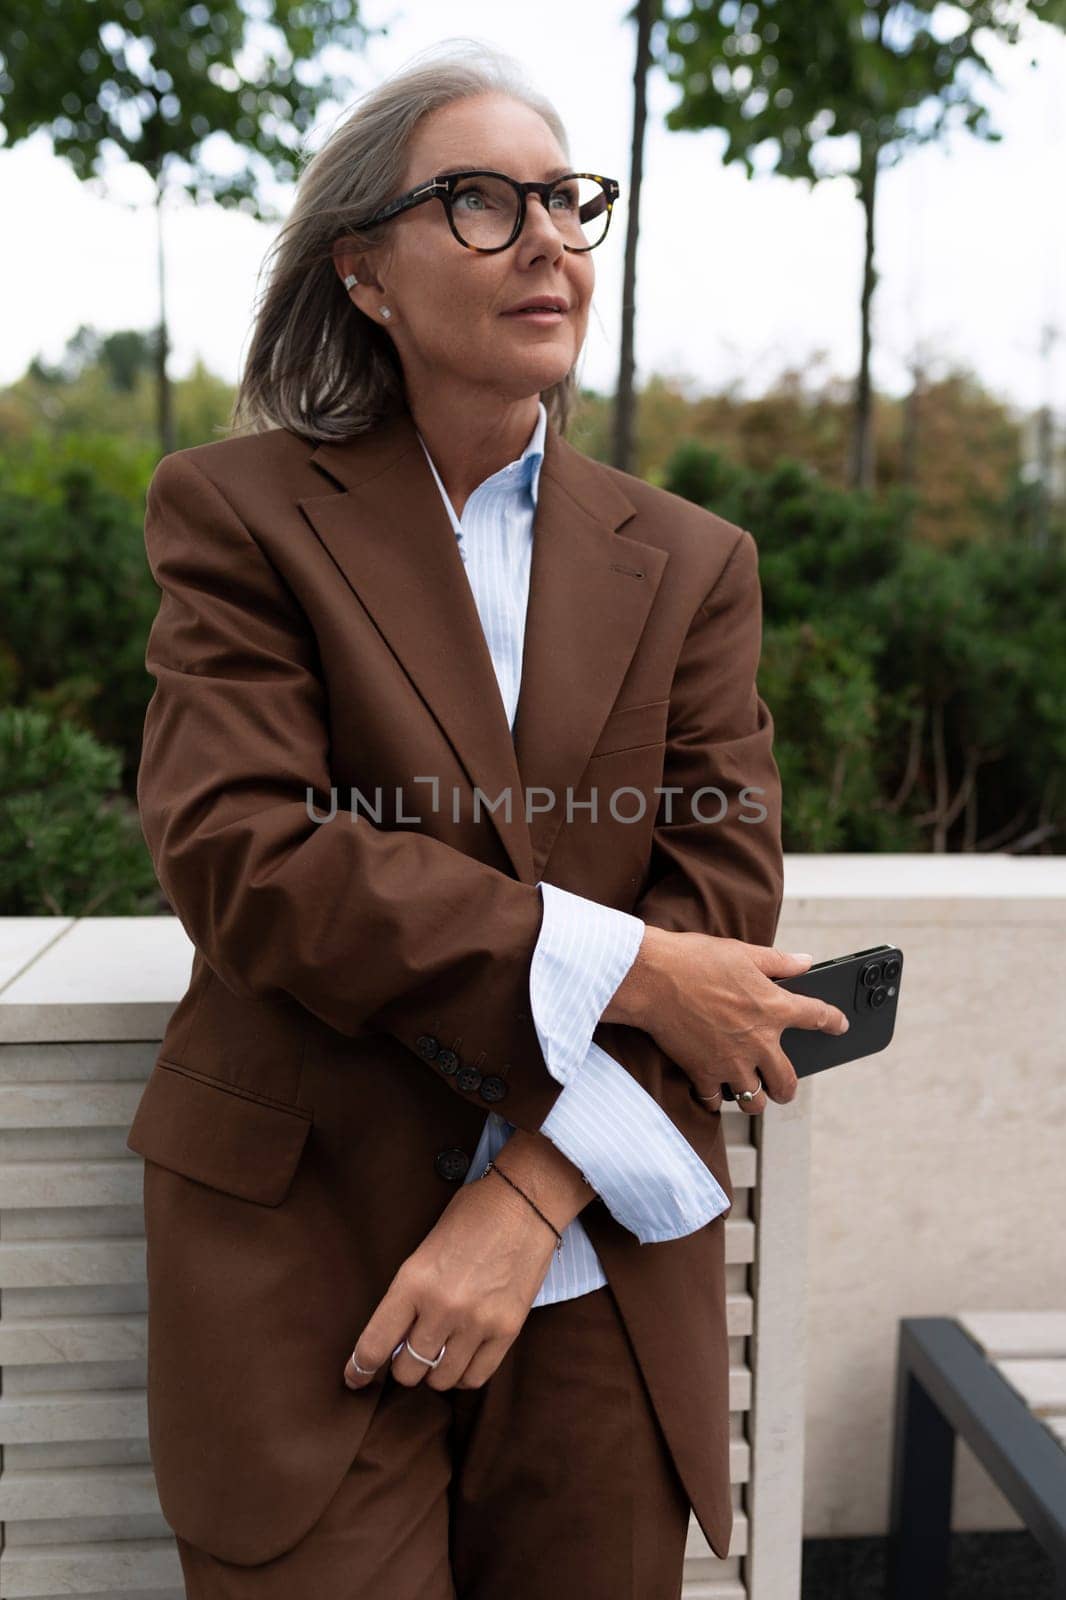 well-groomed business woman of mature years dressed in an elegant brown suit walks around the city.